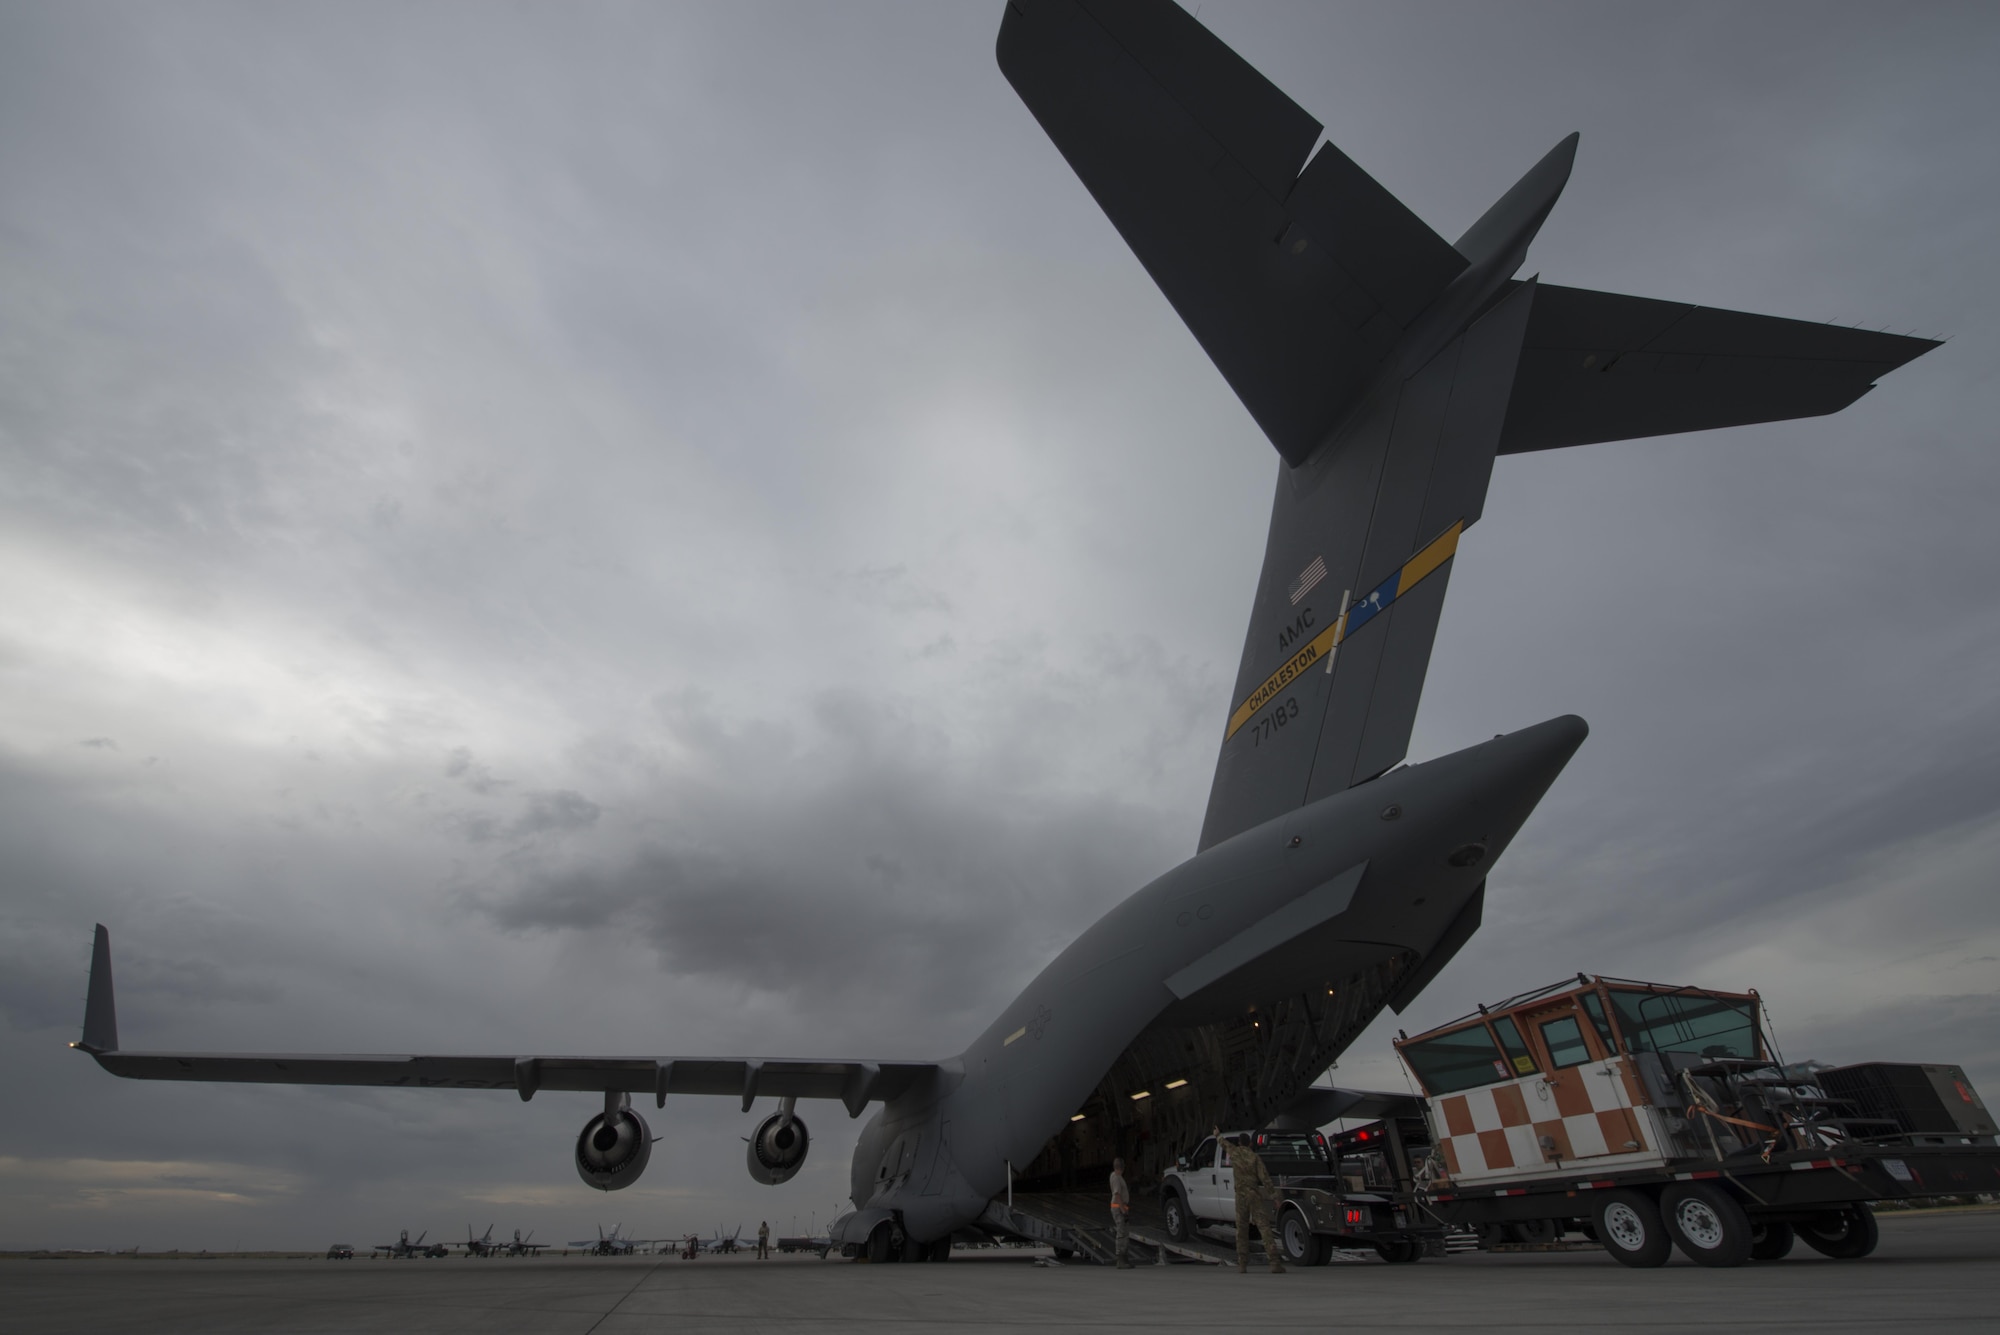 Airmen from the 366th Logistics Readiness Squadron and the 437th Airlift Wing 14th/15th Airlift Squadron load a mobile air traffic control tower onto a C-17 Globemaster III to support Hurricane Irma relief efforts September 9th, 2017. The air traffic control tower will help restore ground to air communications at St. Thomas, U.S. Virgin Islands. (U.S. Air Force photo by Airman 1st Class JaNae S. Capuno)